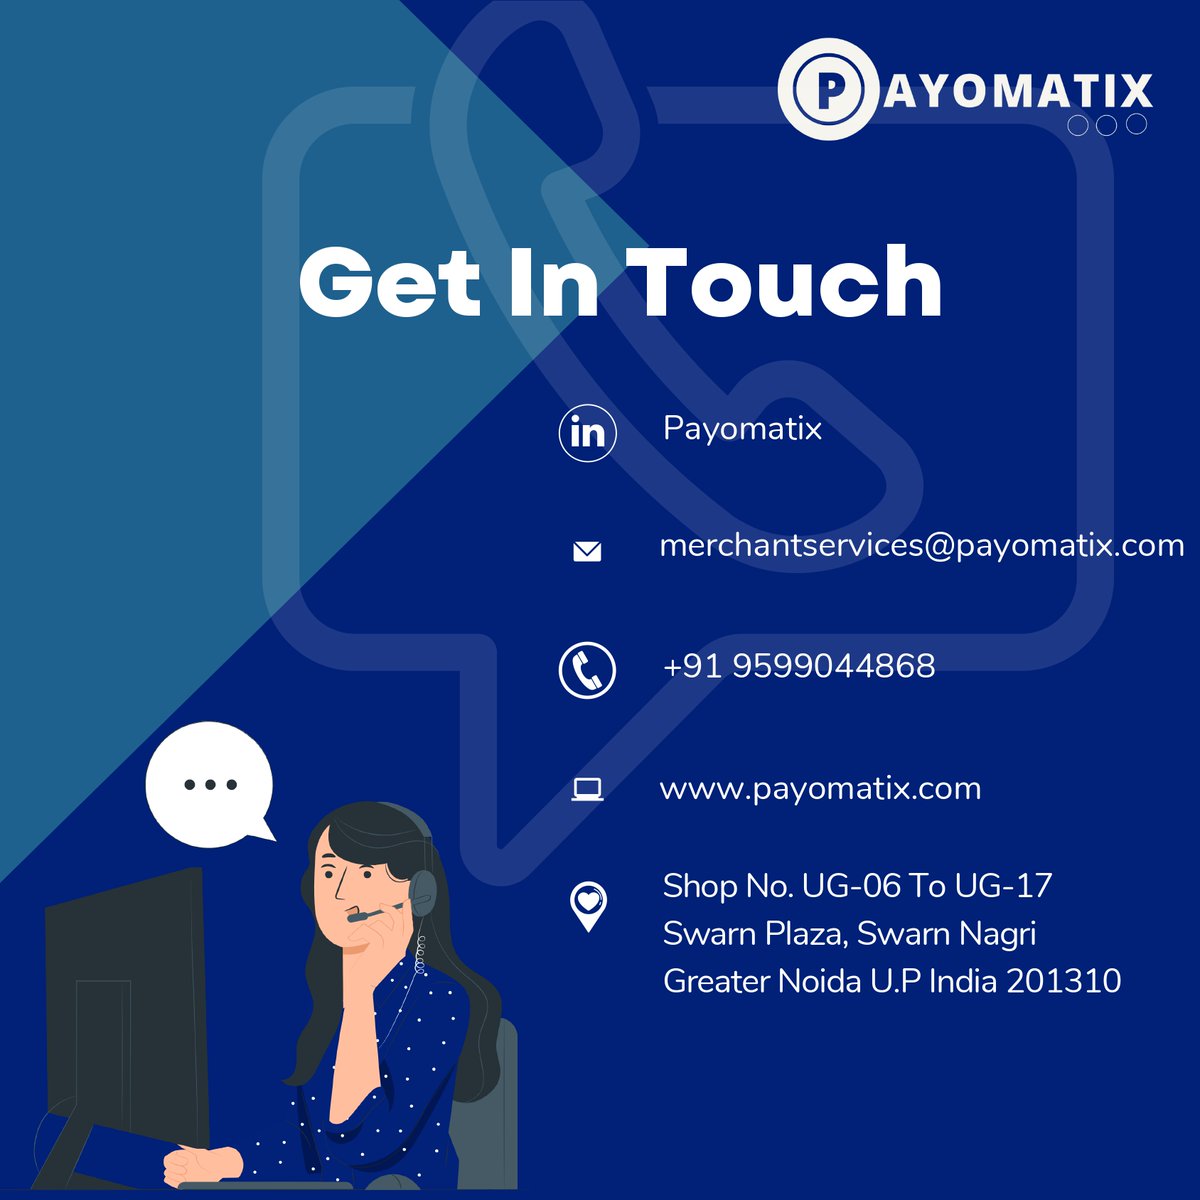 At Payomatix, we take security very seriously and have designed our payment platform with sophisticated fraud screening mechanisms in place. 🕵️‍♀️🔒
#PaymentSecurity #FraudPrevention #OnlineTransactions #Payomatix
#paymentsolutions #paymentprocessing #paymentgateway